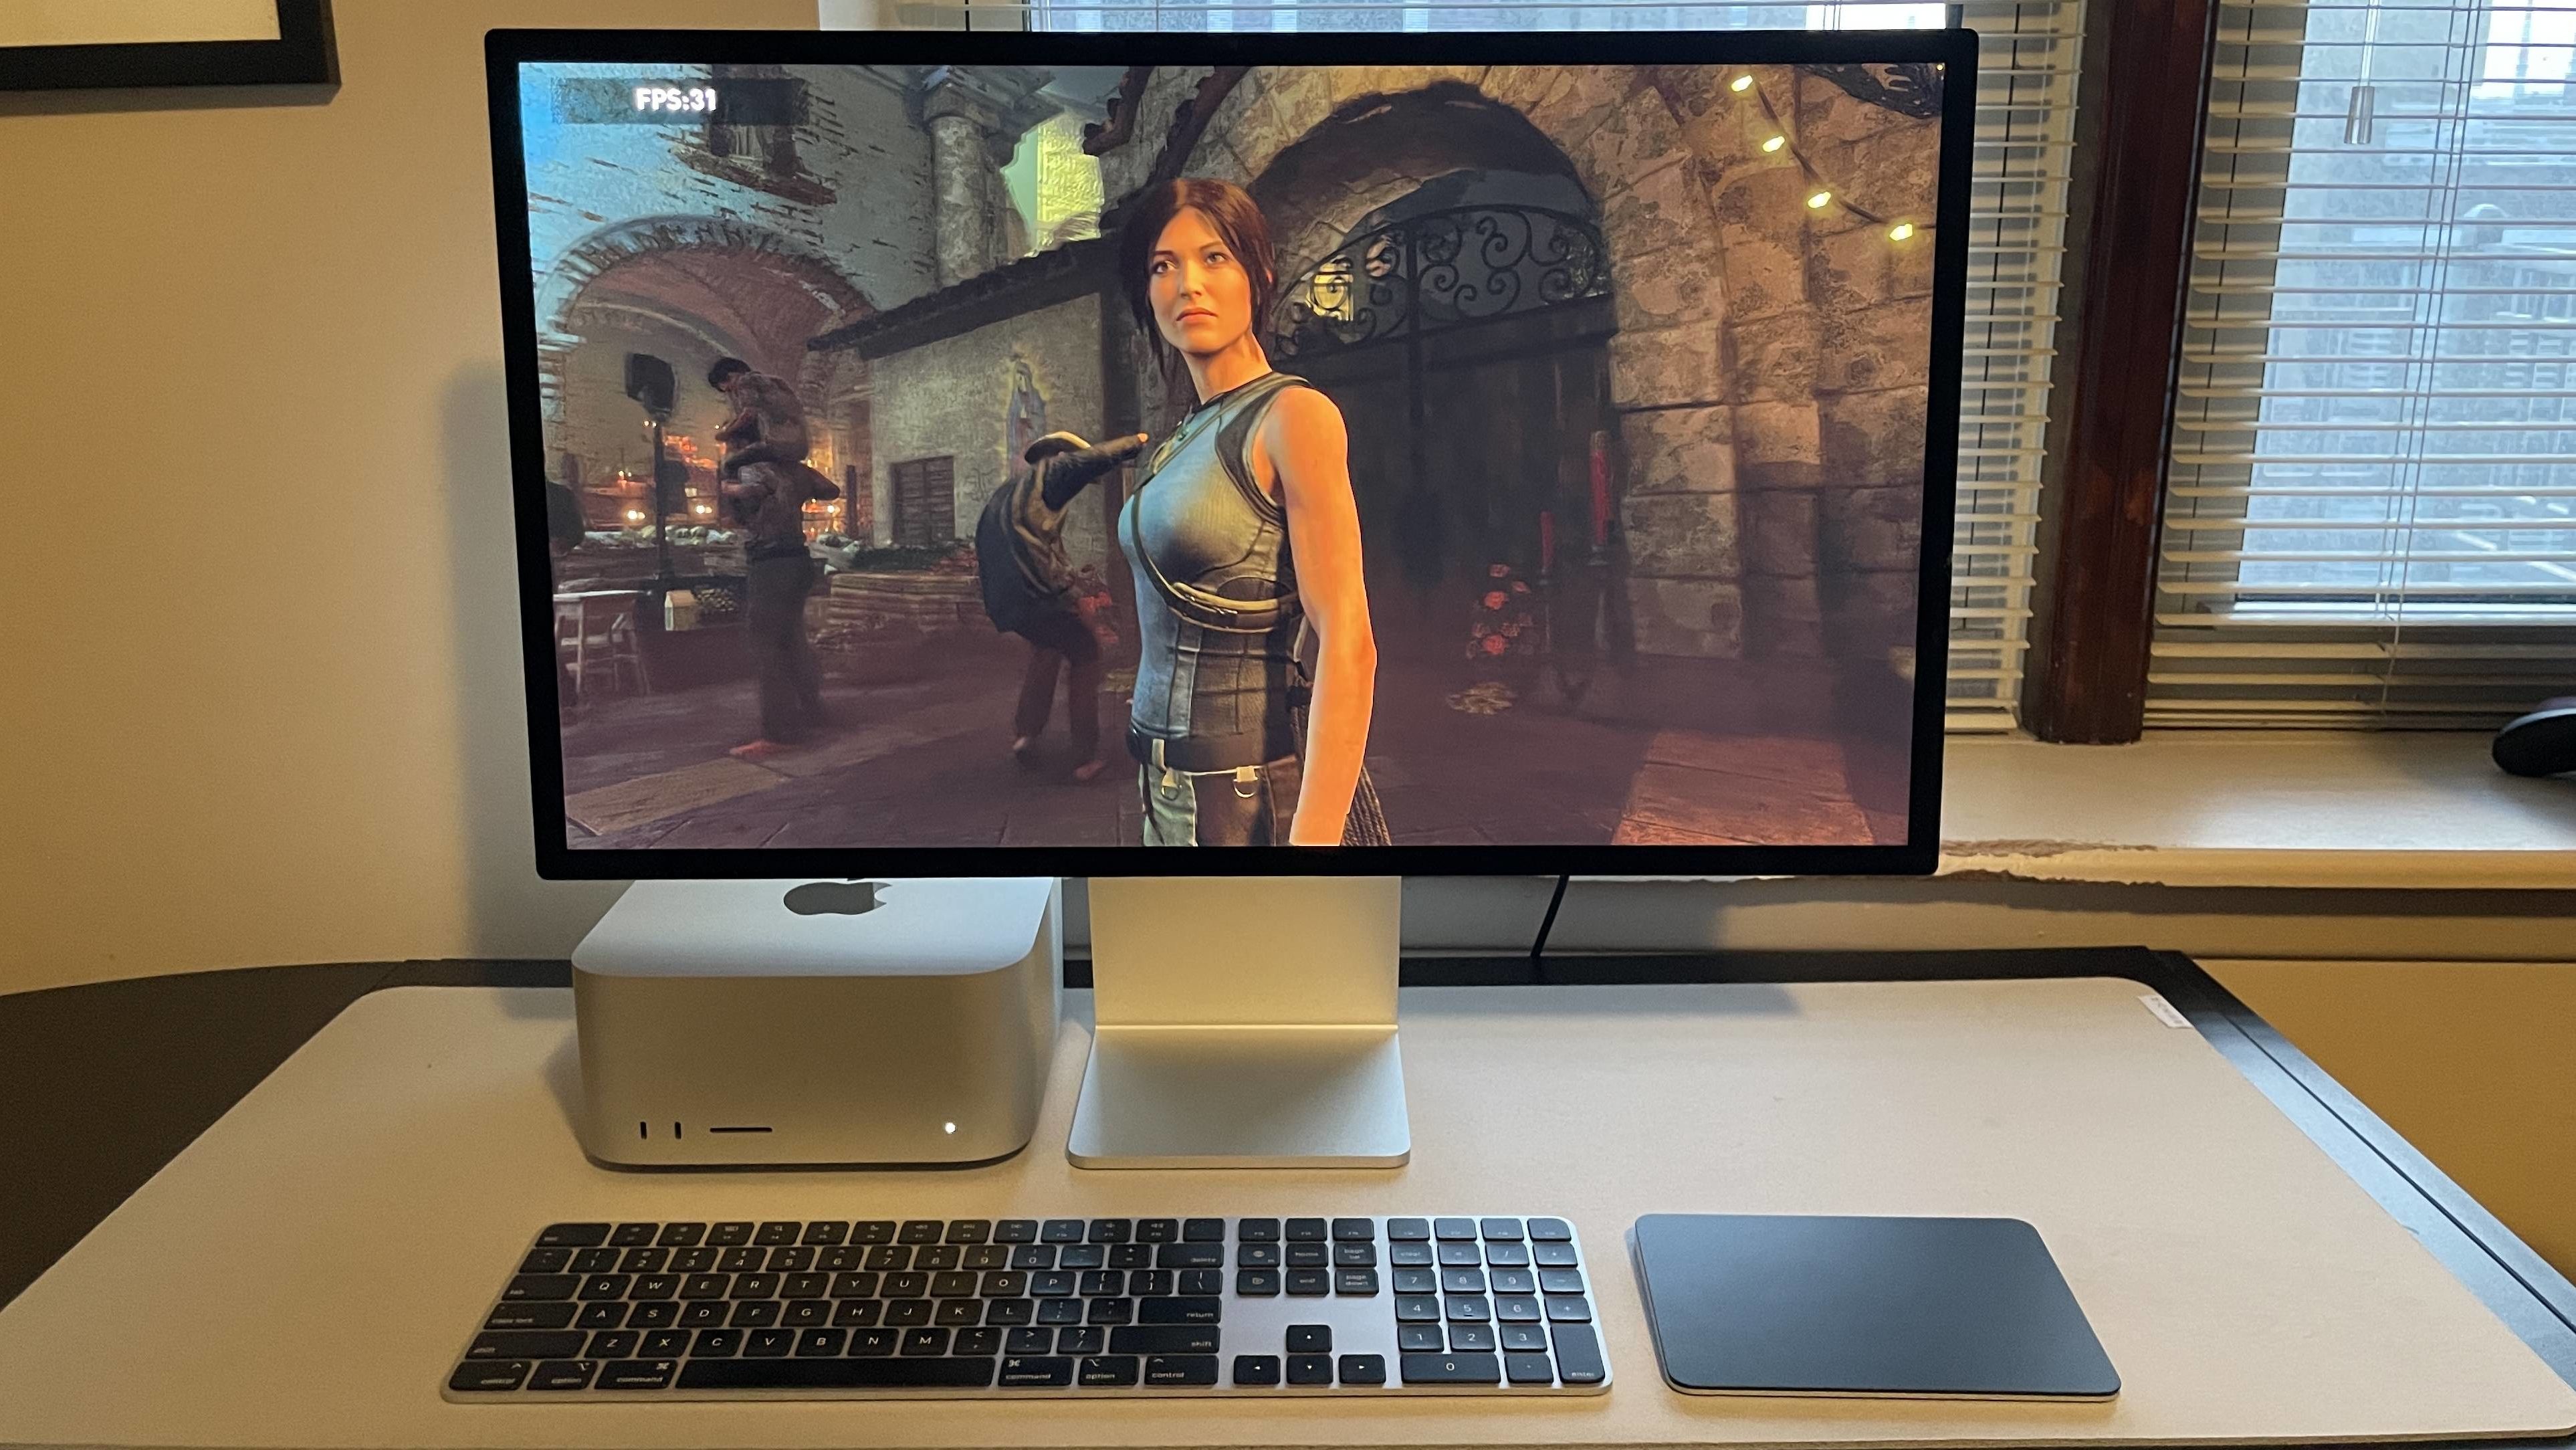 Mac Studio: Should You Buy? Features, Price, Reviews and More